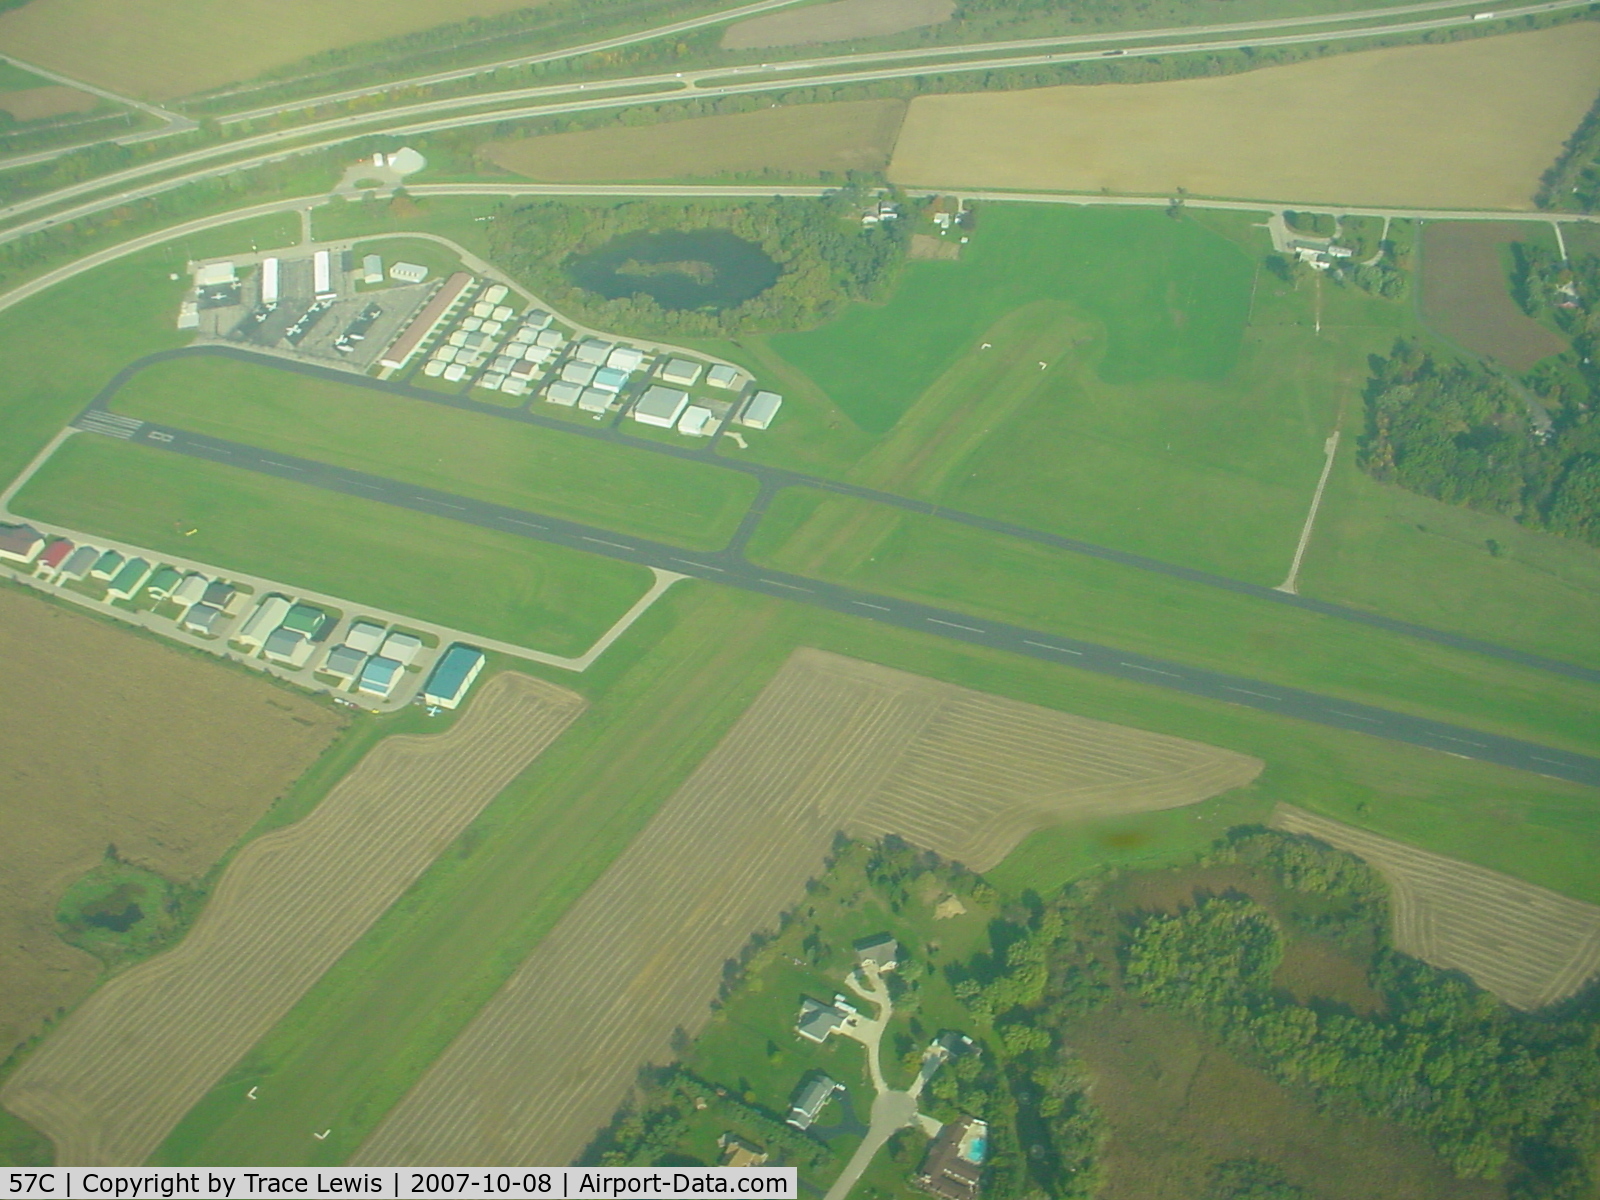 East Troy Municipal Airport (57C) - Overhead going to MWC